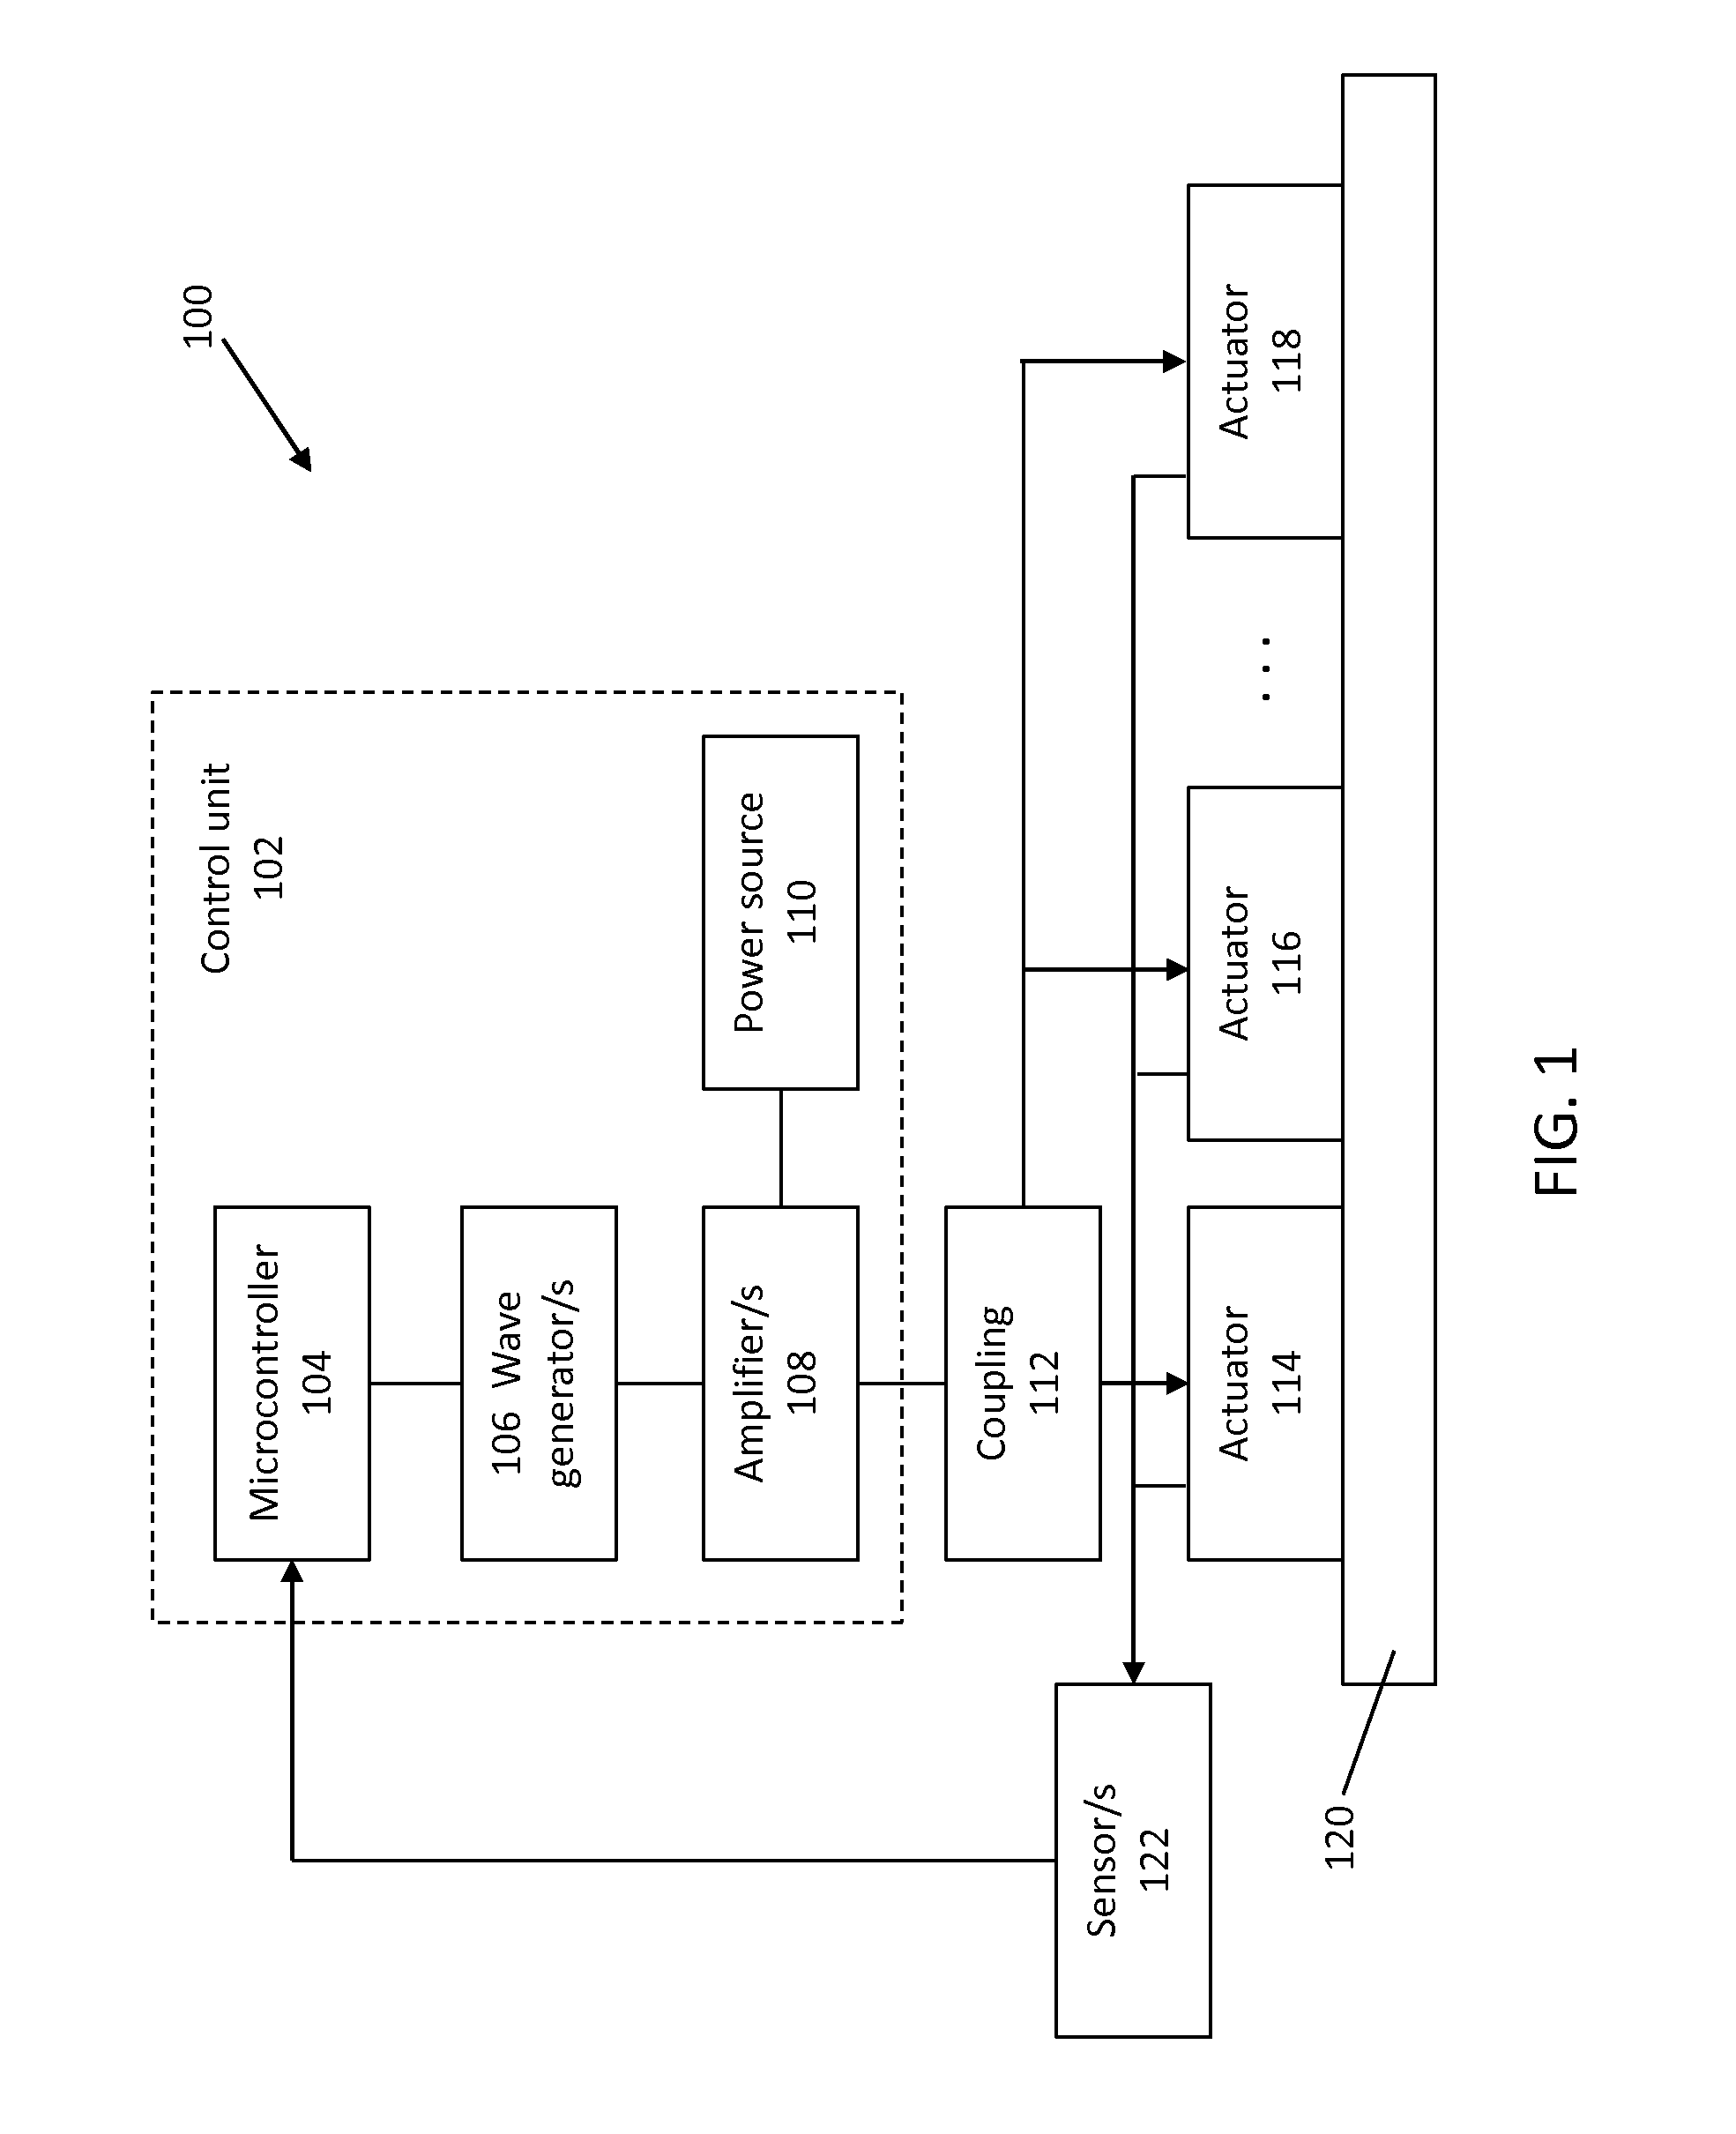 Method and apparatus for inhibiting formation of and/or removing ice from aircraft components